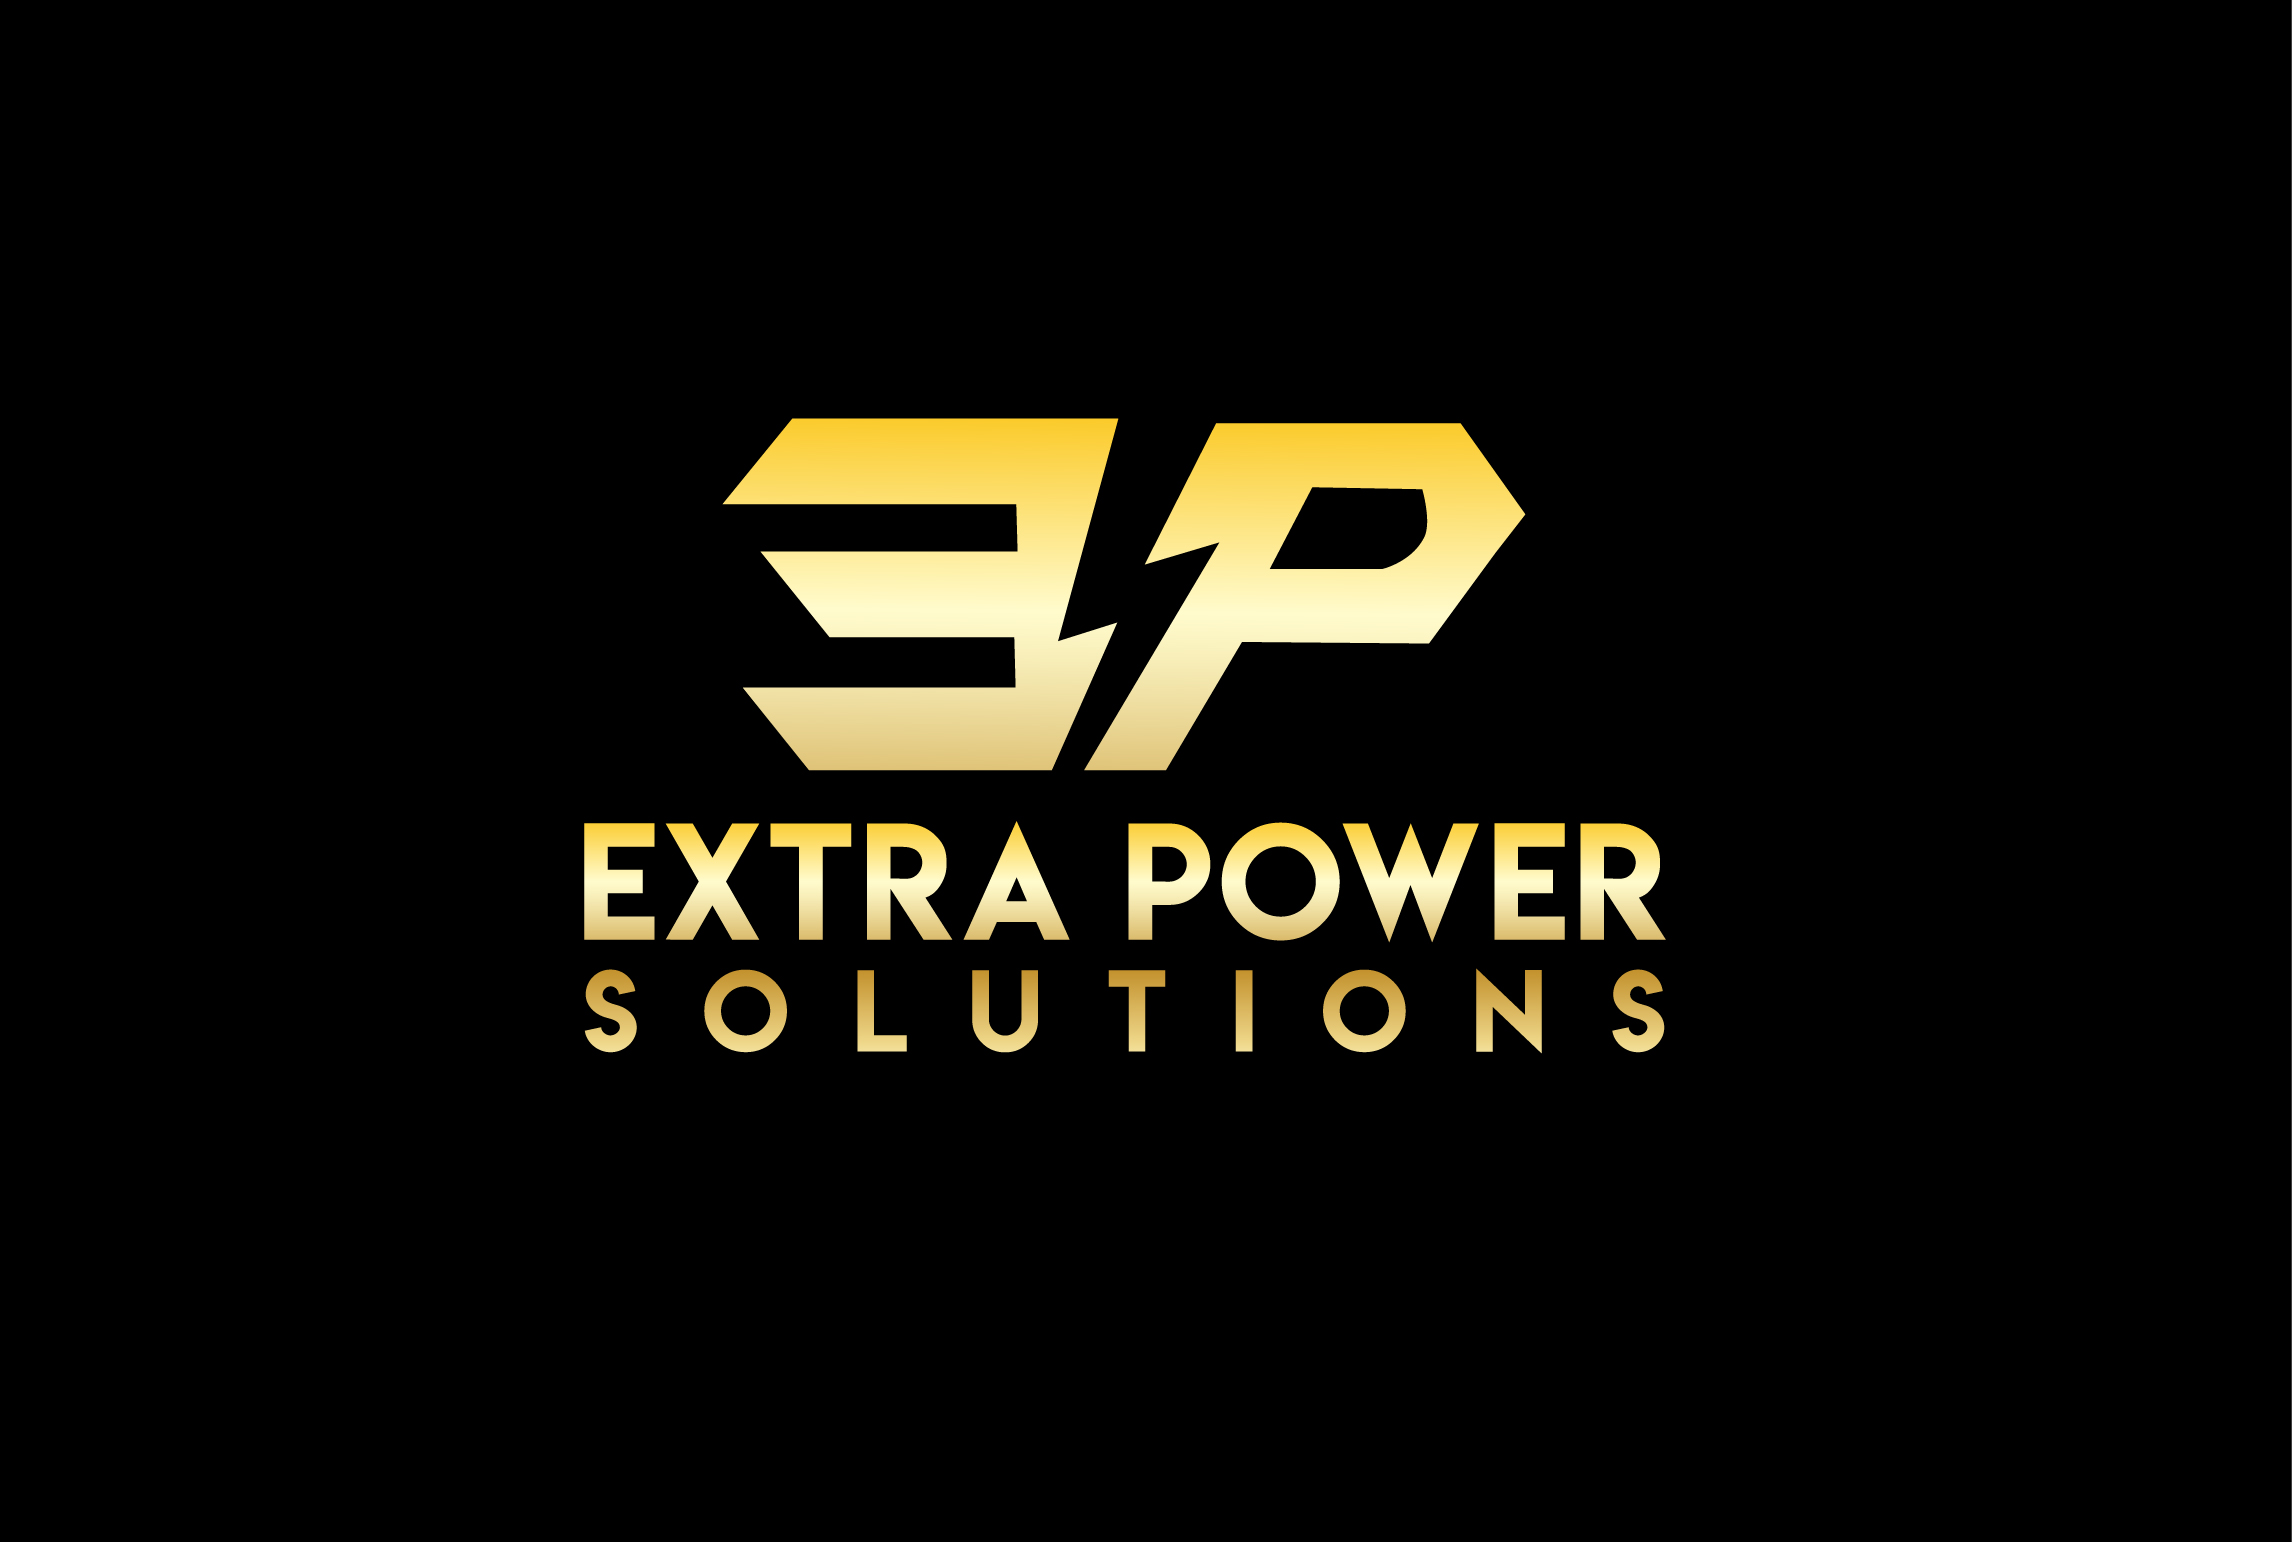 Extra Power Solutions